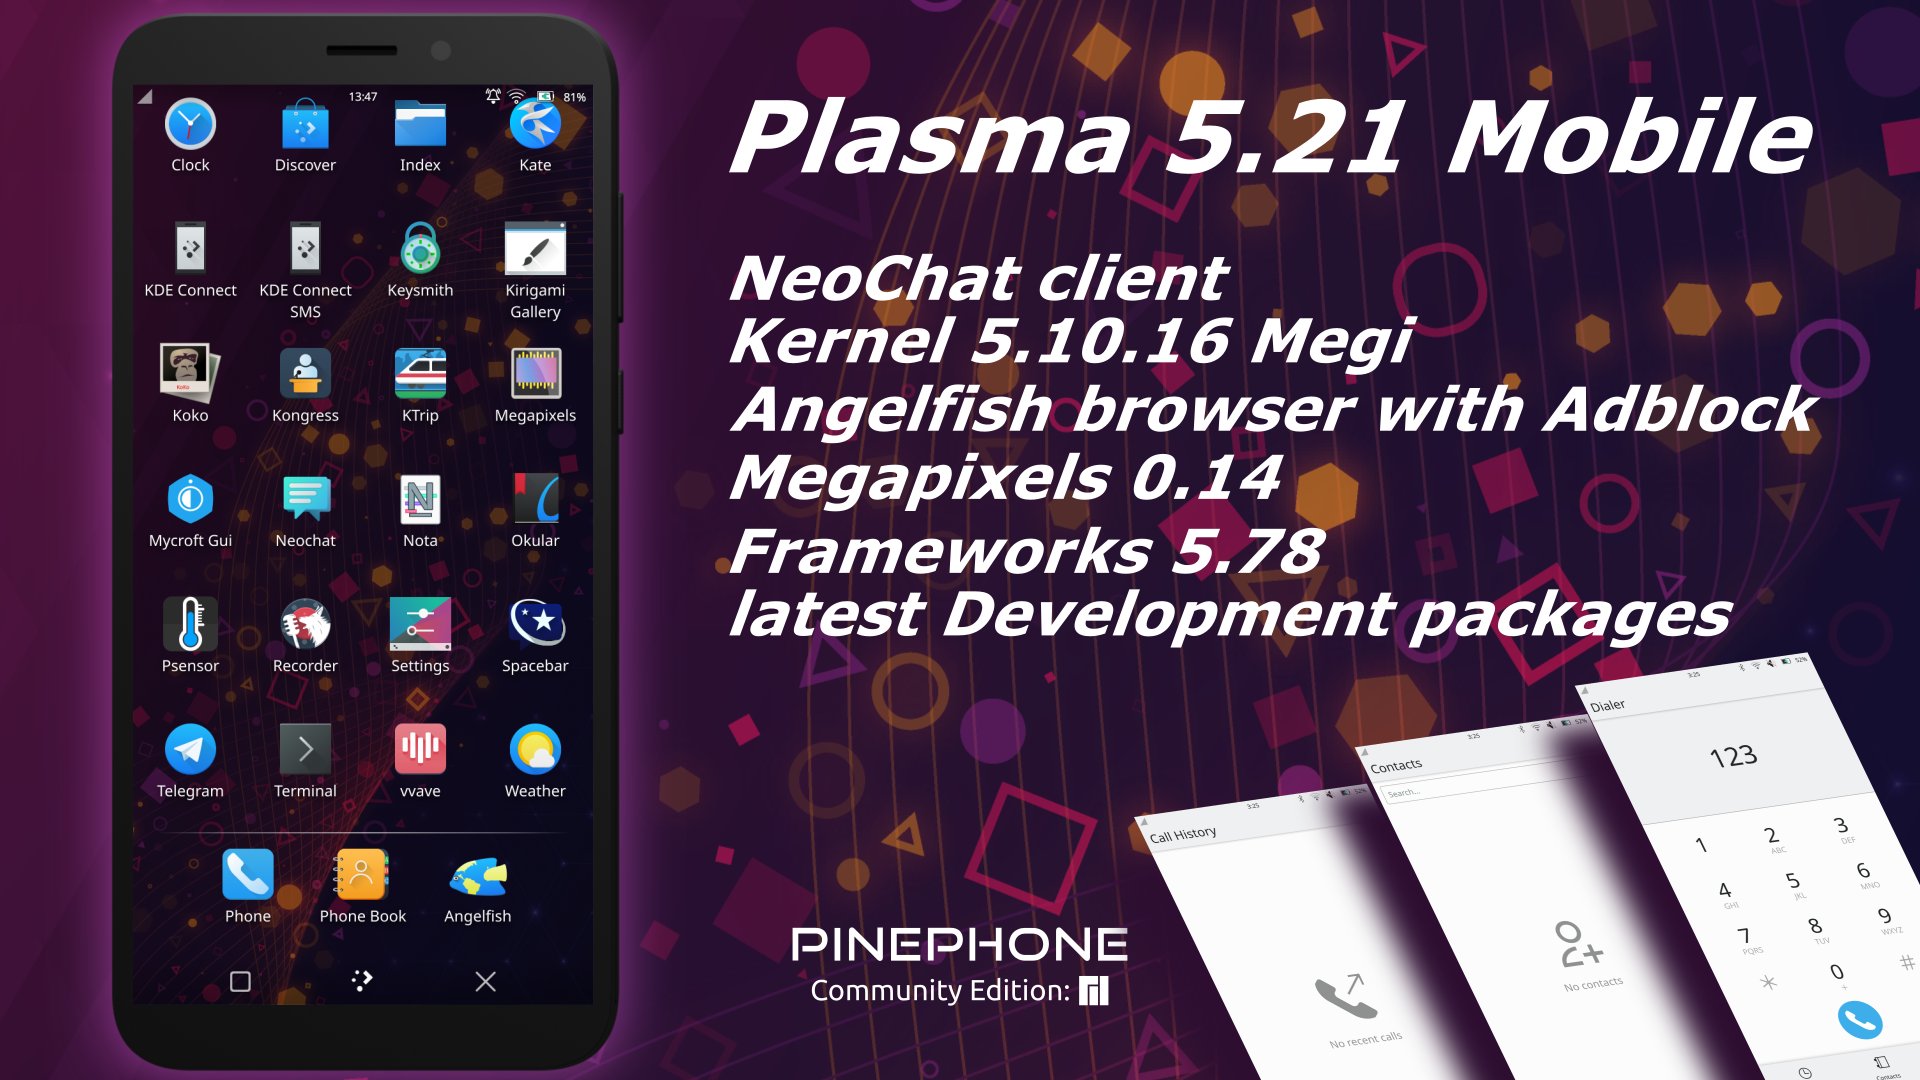 You Can Now Run KDE Plasma 5.21 on Your PinePhone with Manjaro Linux ARM